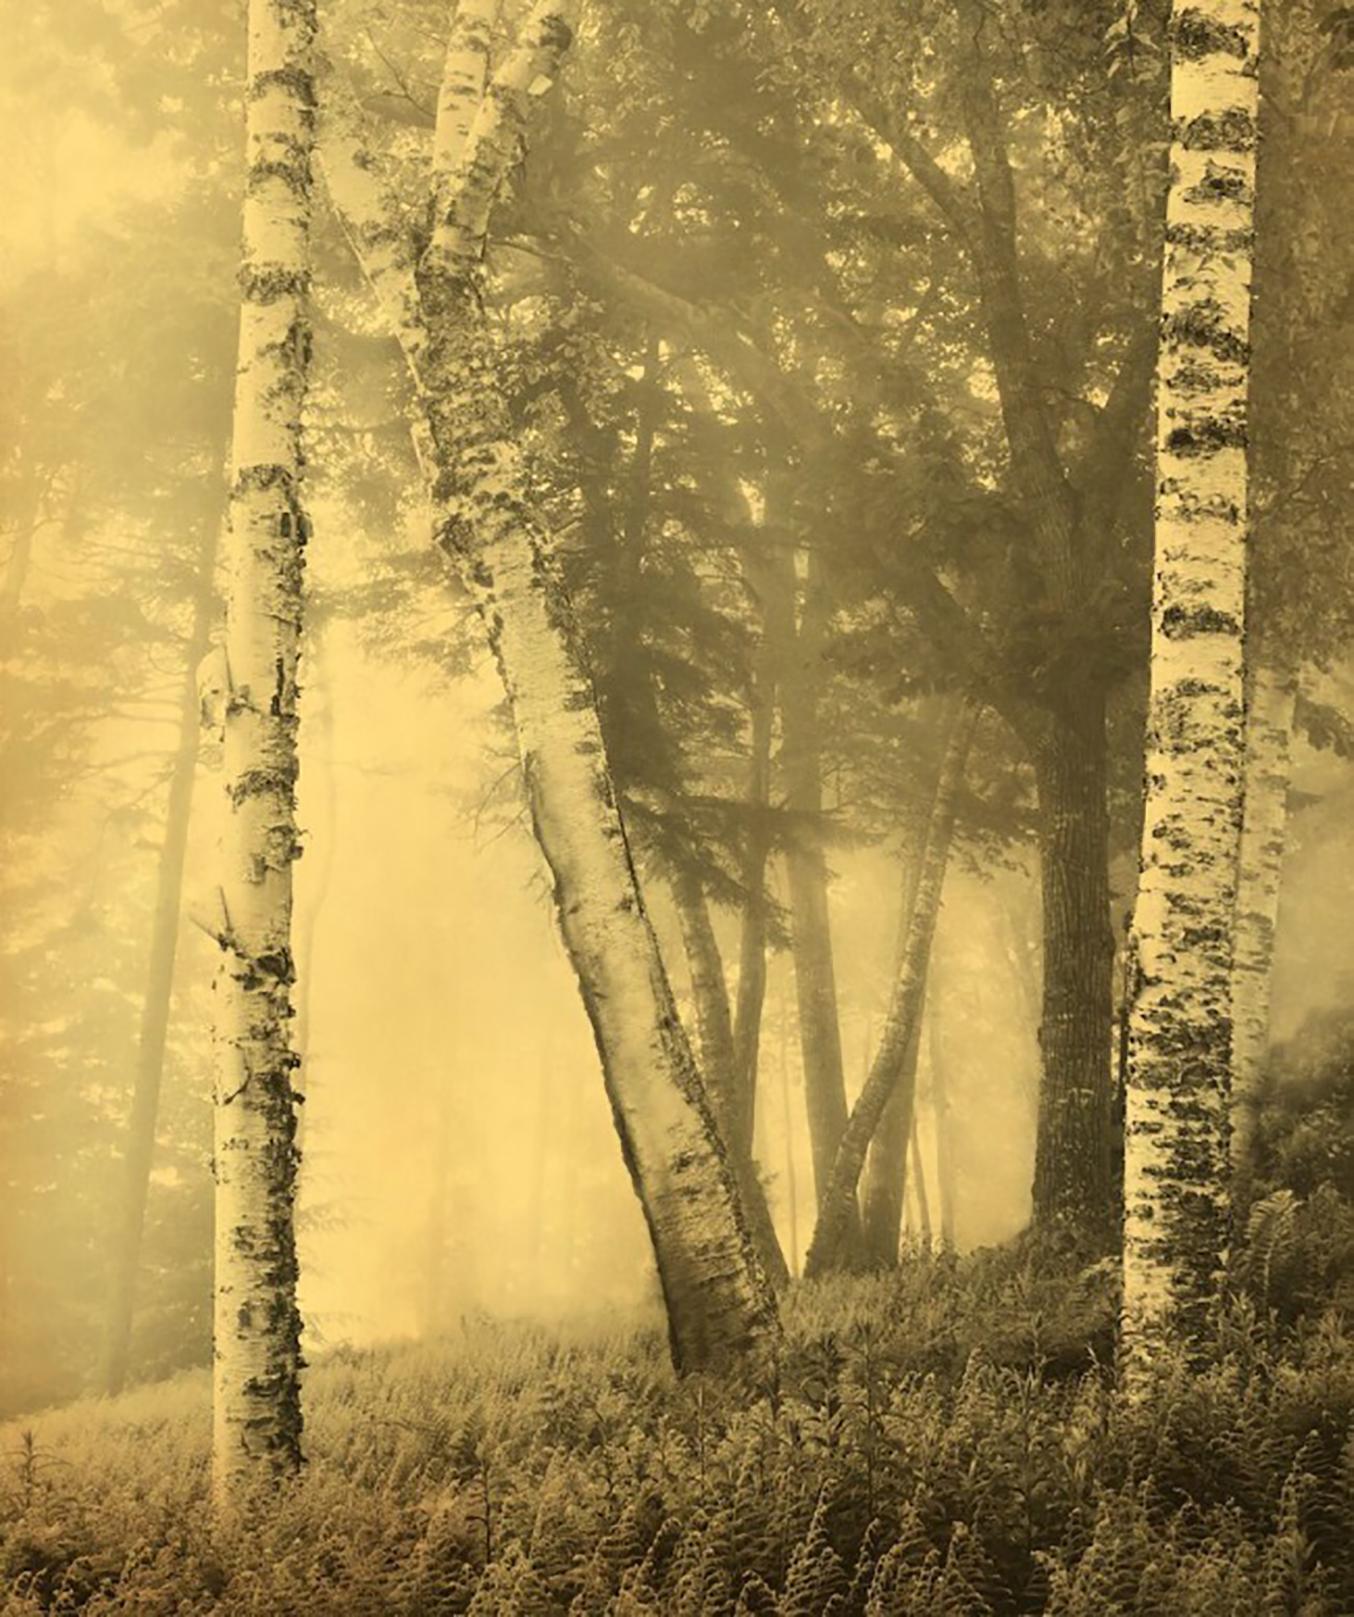 Joyce Tenneson, Birches, 2016 (trees),  (also available as very large prints, please inquire), archival pigment ink print. AP. Image size: Image Size: 13  x 15.5", Matted 20 x 26". Signed, dated and editioned on print recto. The _Alchemy of Light_